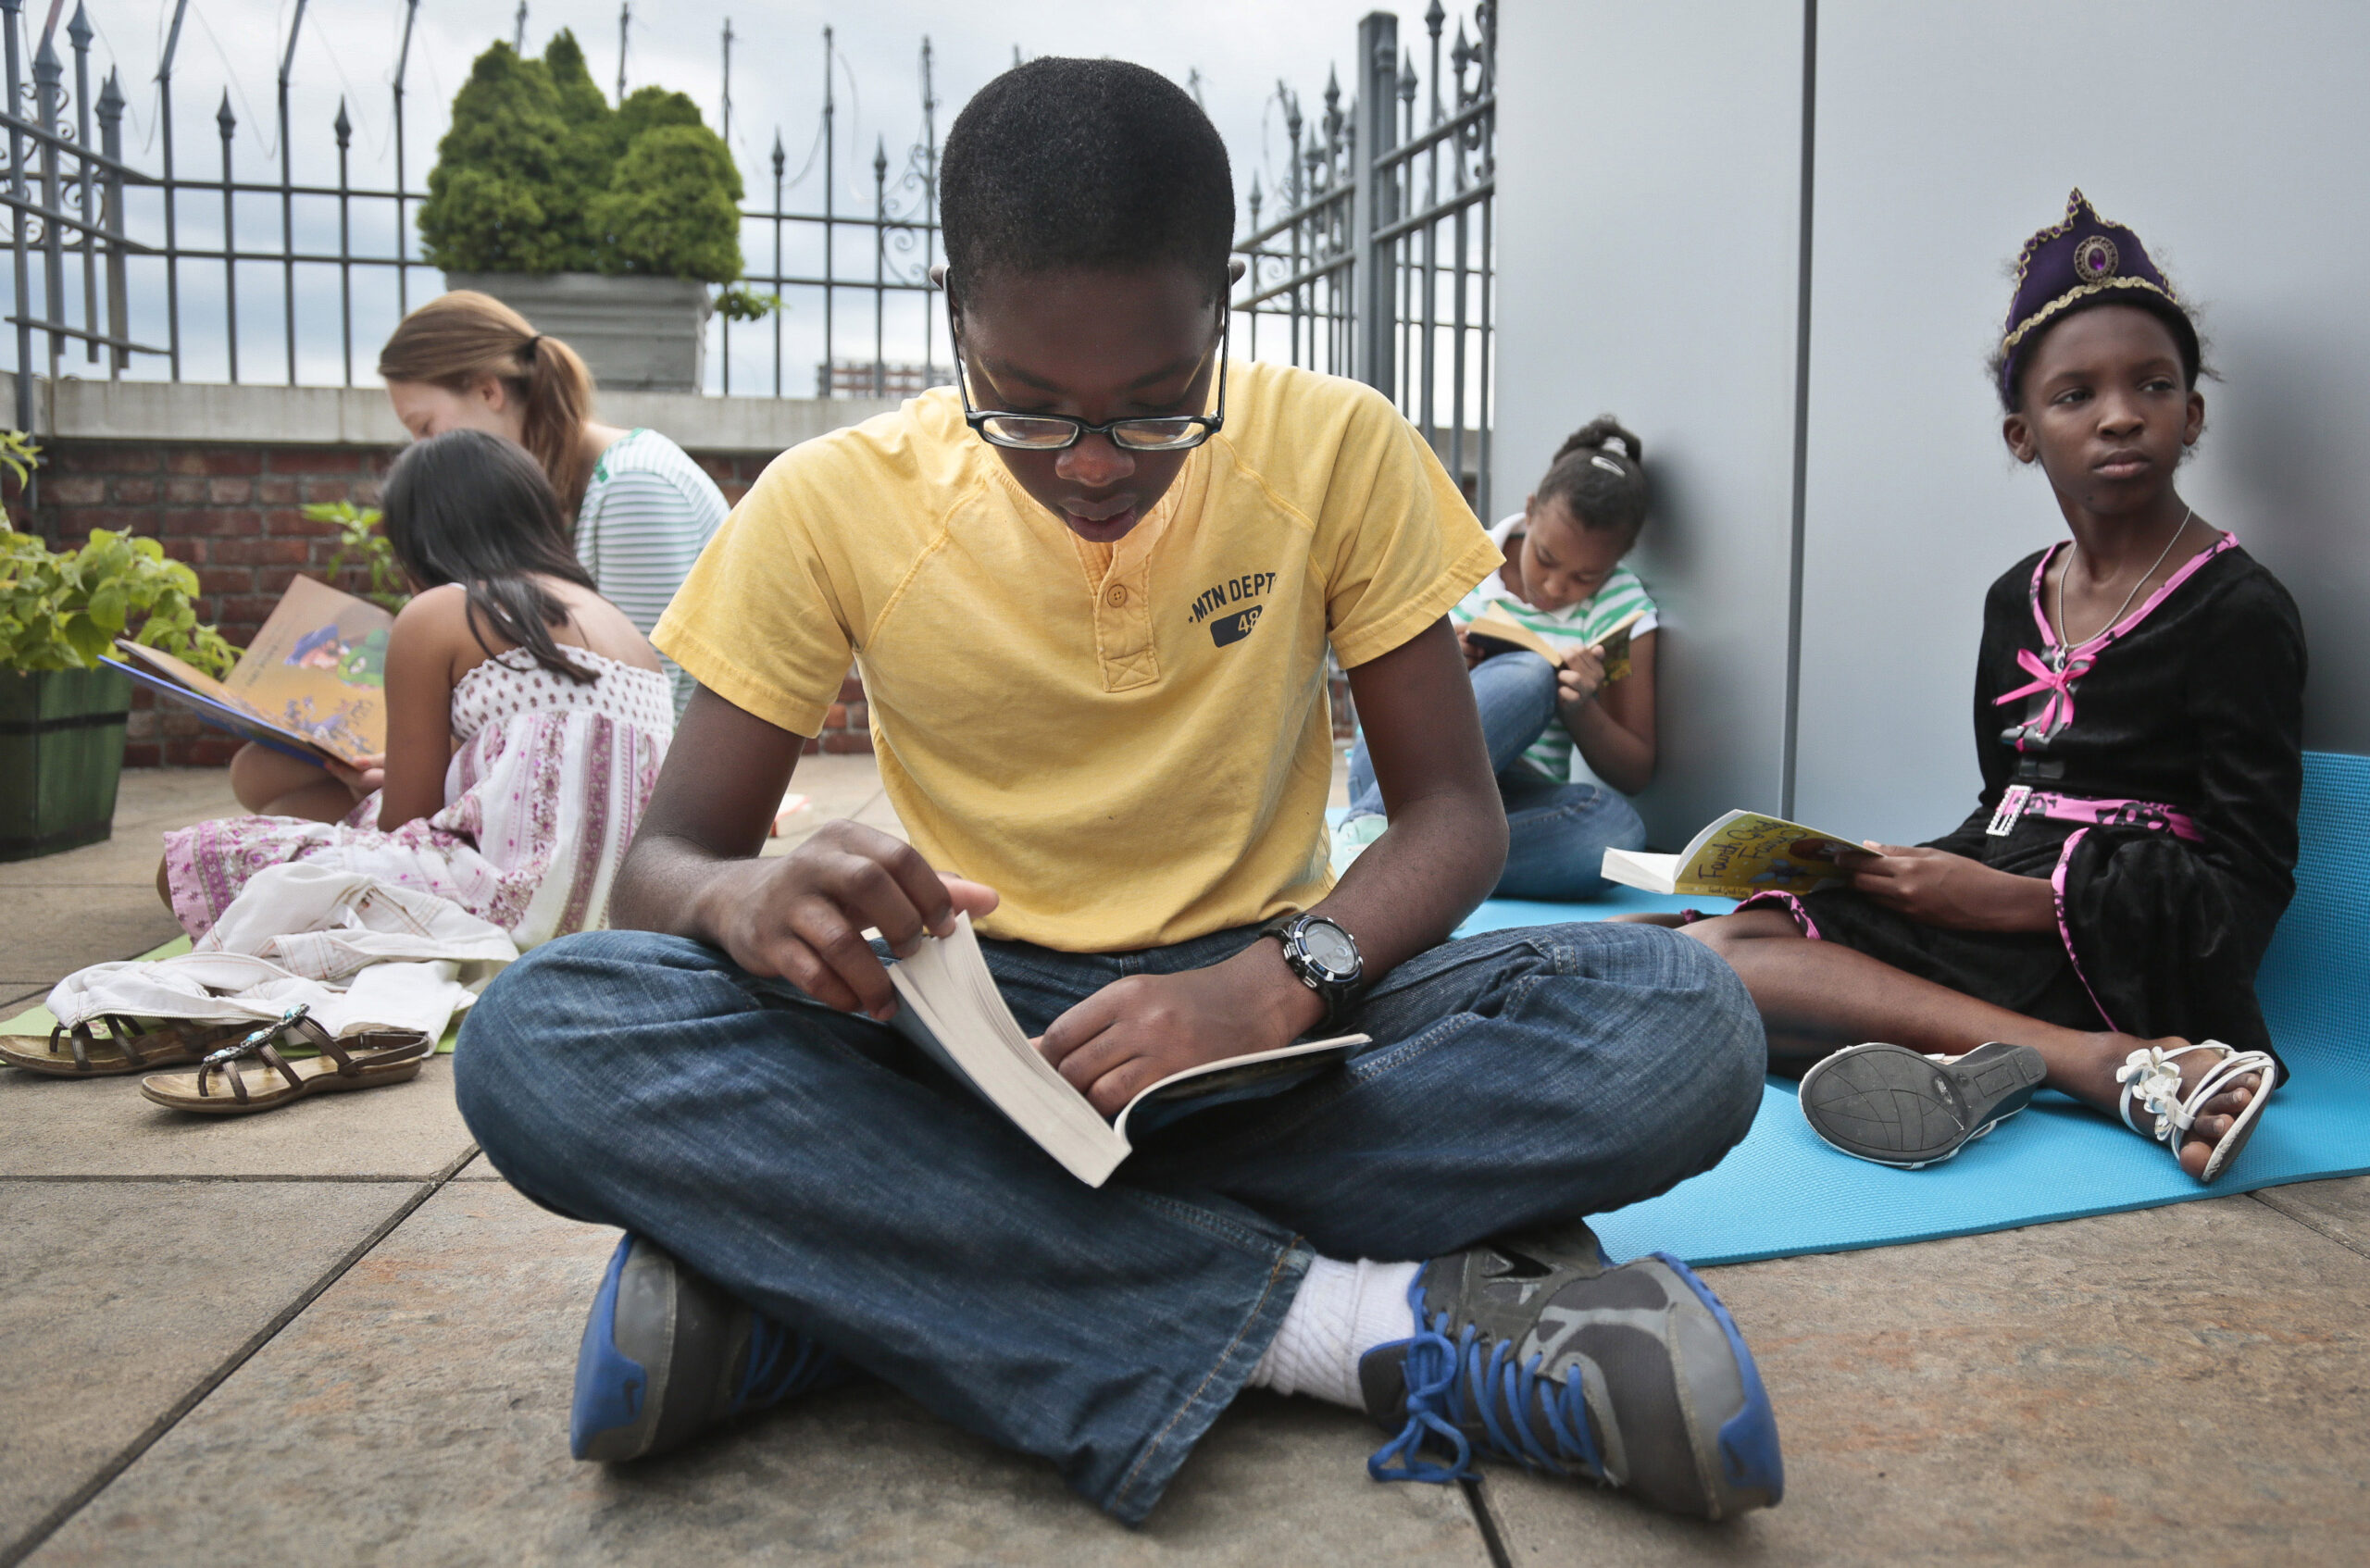 Rohan Beckford, reads Percy Jackson's fifth book in the series "The last Olympian"